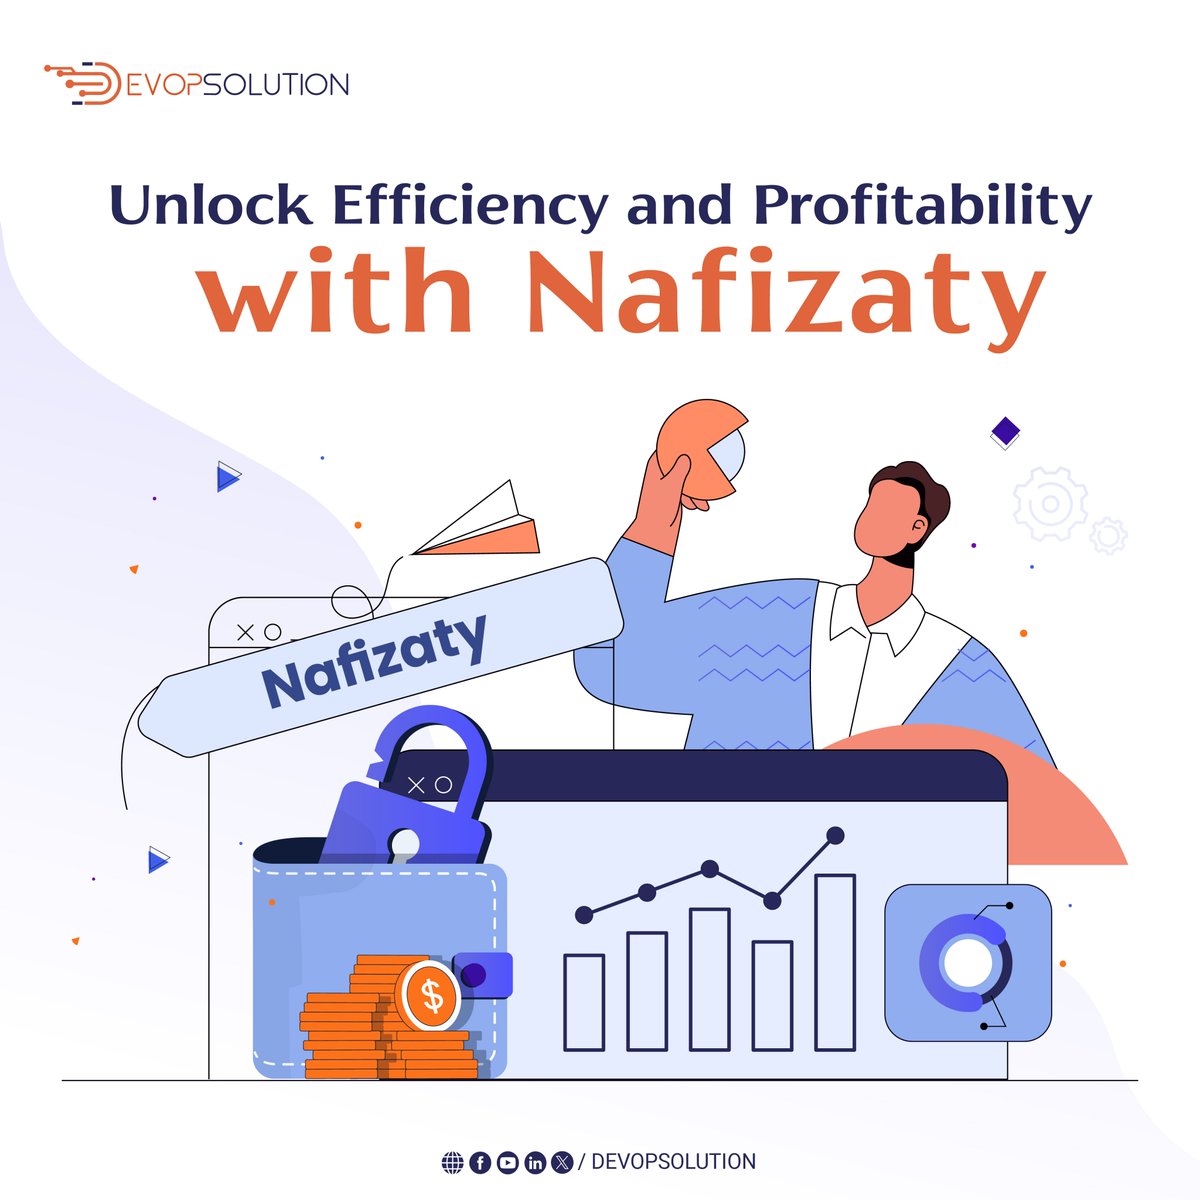 A study by McKinsey found that businesses can improve their profitability by up to 20% by streamlining operations.
#Nafizaty can help you achieve that by providing a comprehensive HR workflow management system.
Start Your Efficiency Journey
bit.ly/Nafizaty
 #DEVOPSOLUTION